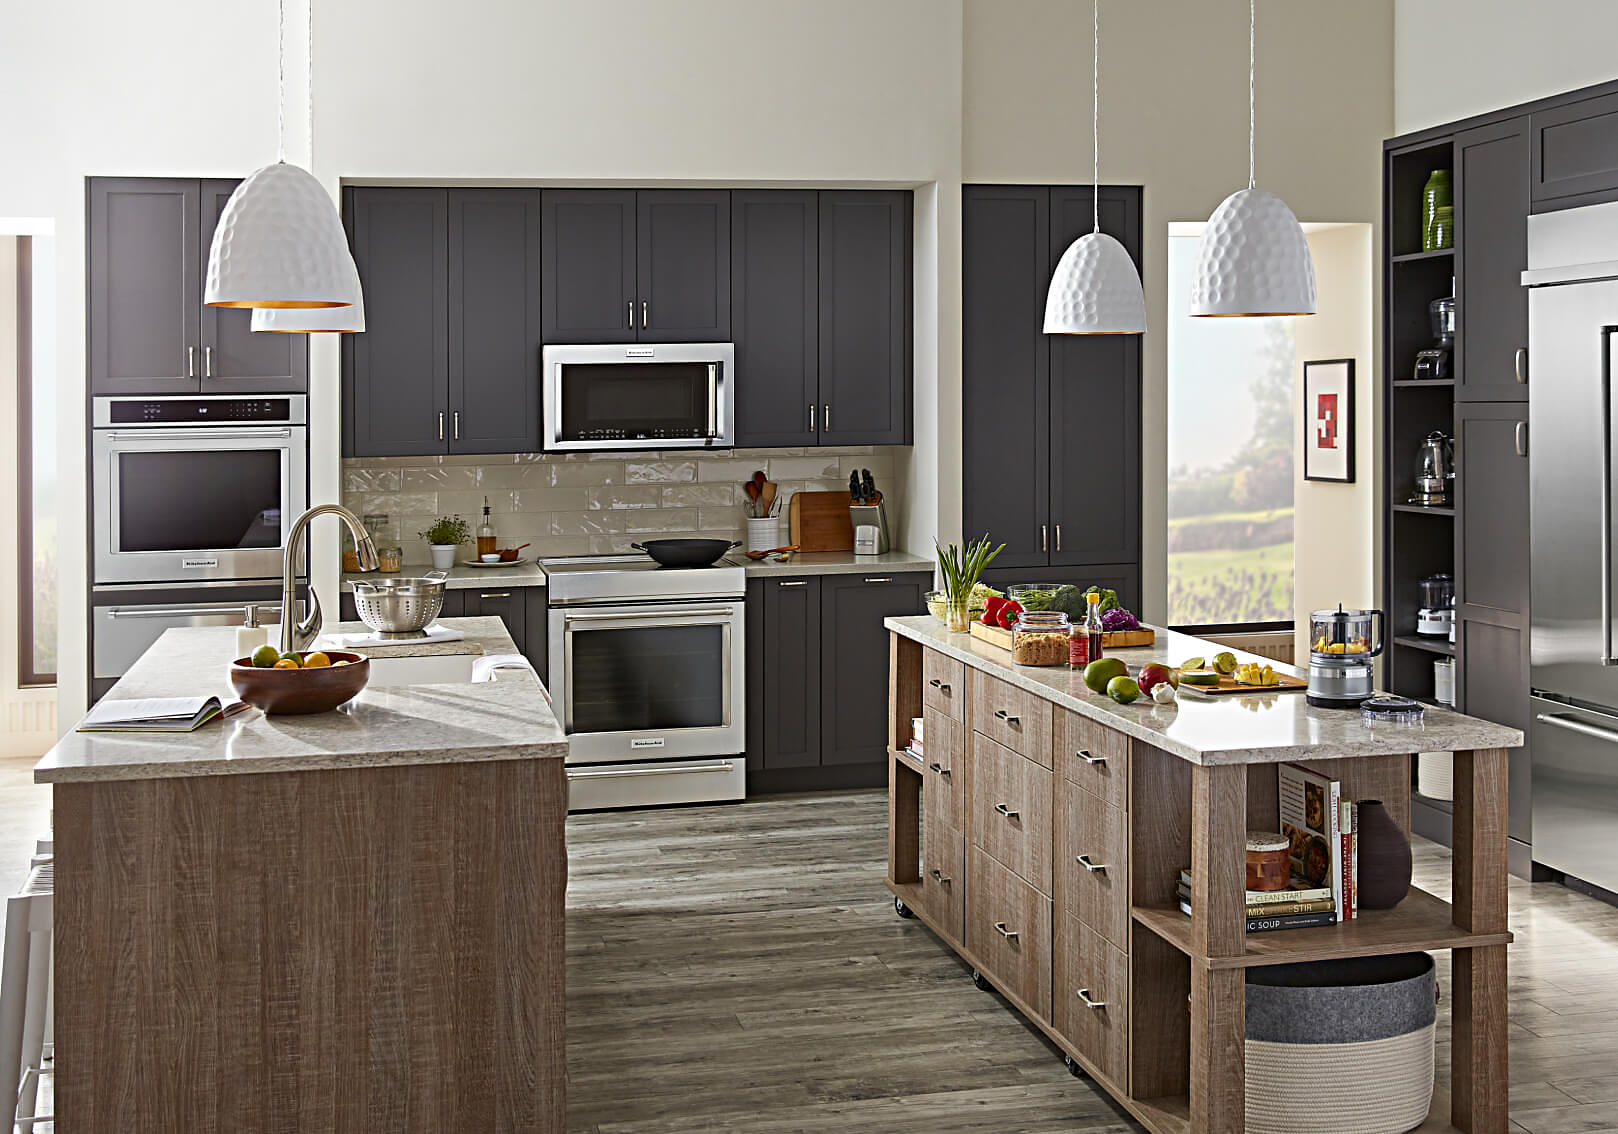 Modern kitchen with grey cabinets, wood paneled island and stainless KitchenAid® appliances.